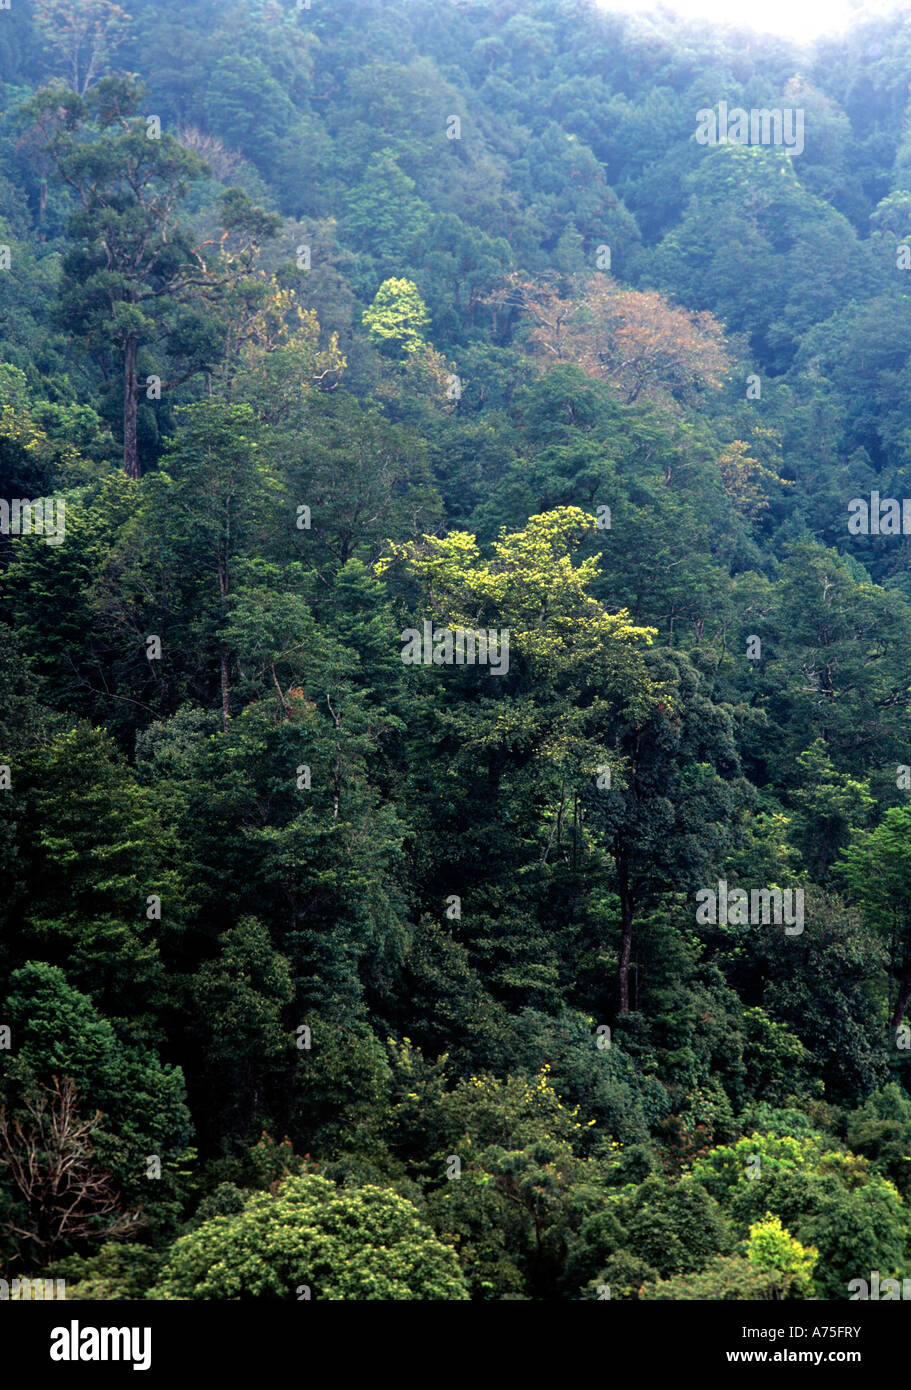 THICK FORESTS IN MUNNAR KERALA Stock Photo